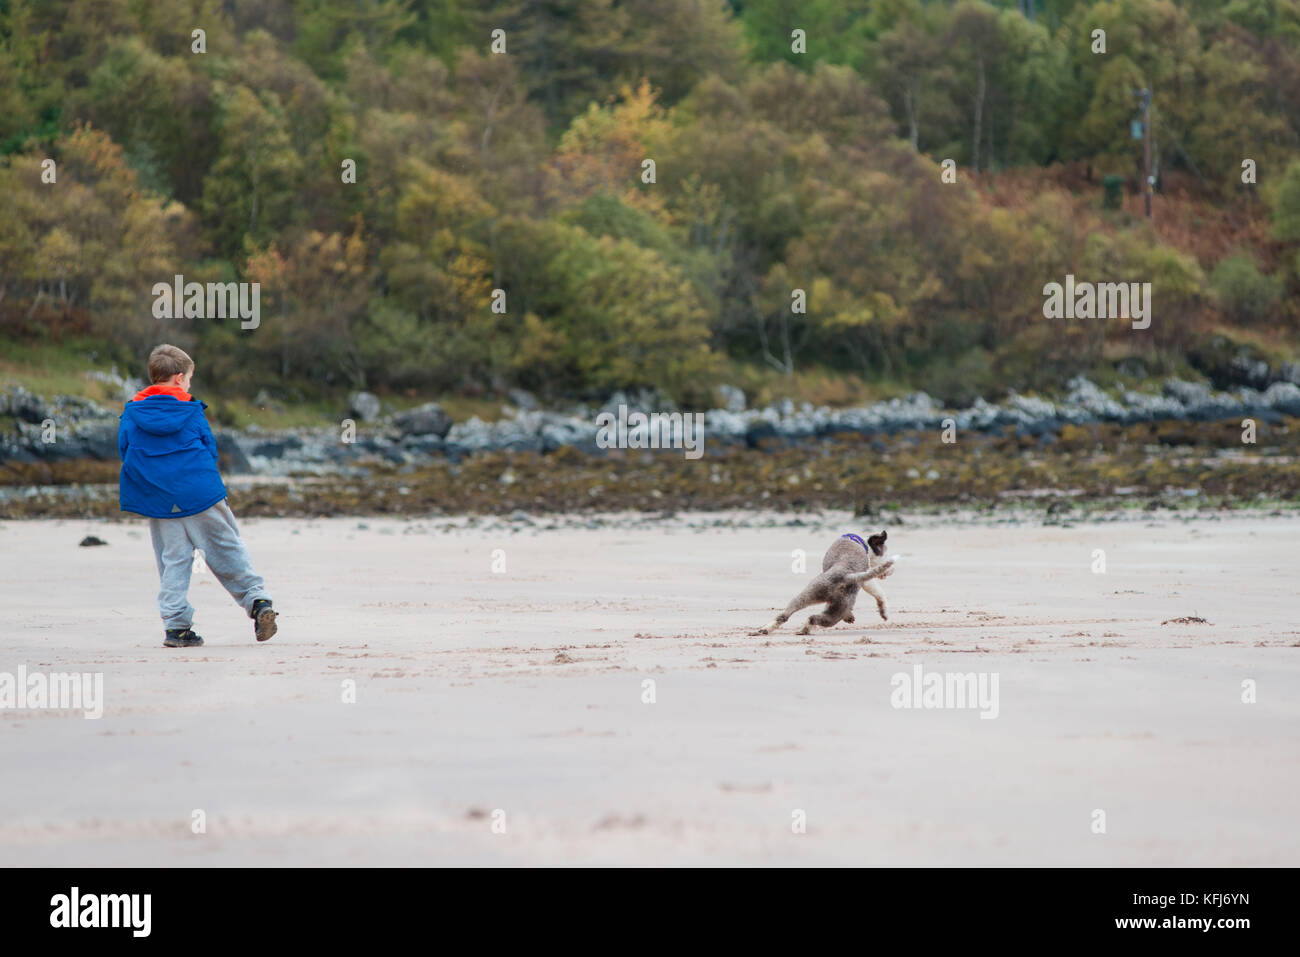 Spanish water dog playing with child on beach Stock Photo